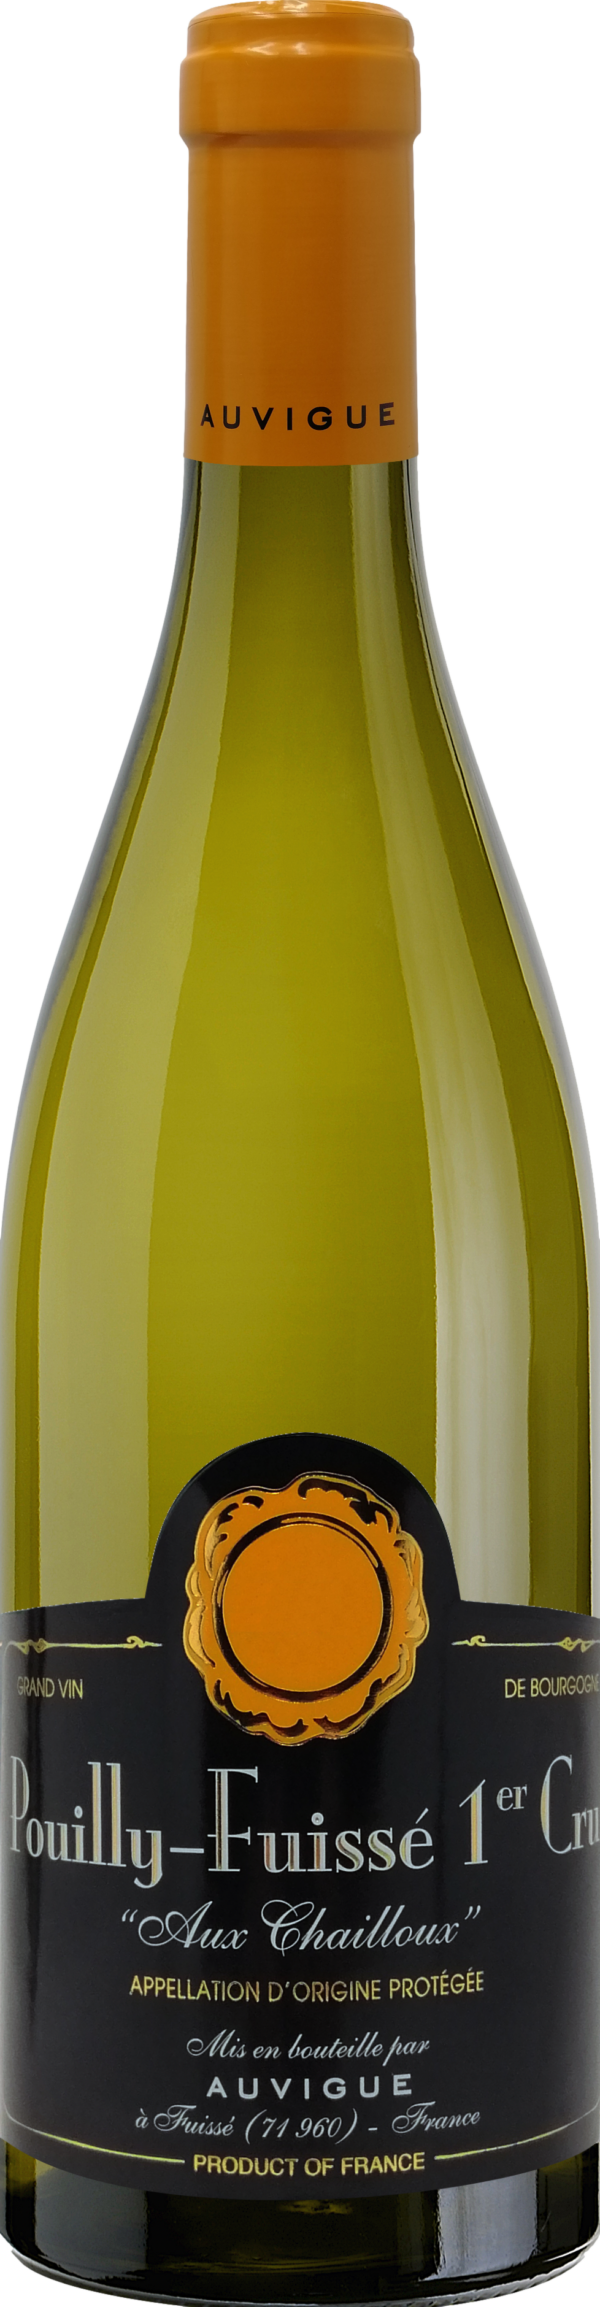 Product image of Auvigue Pouilly-Fuisse Premier Cru Aux Chailloux 2021 from 8wines